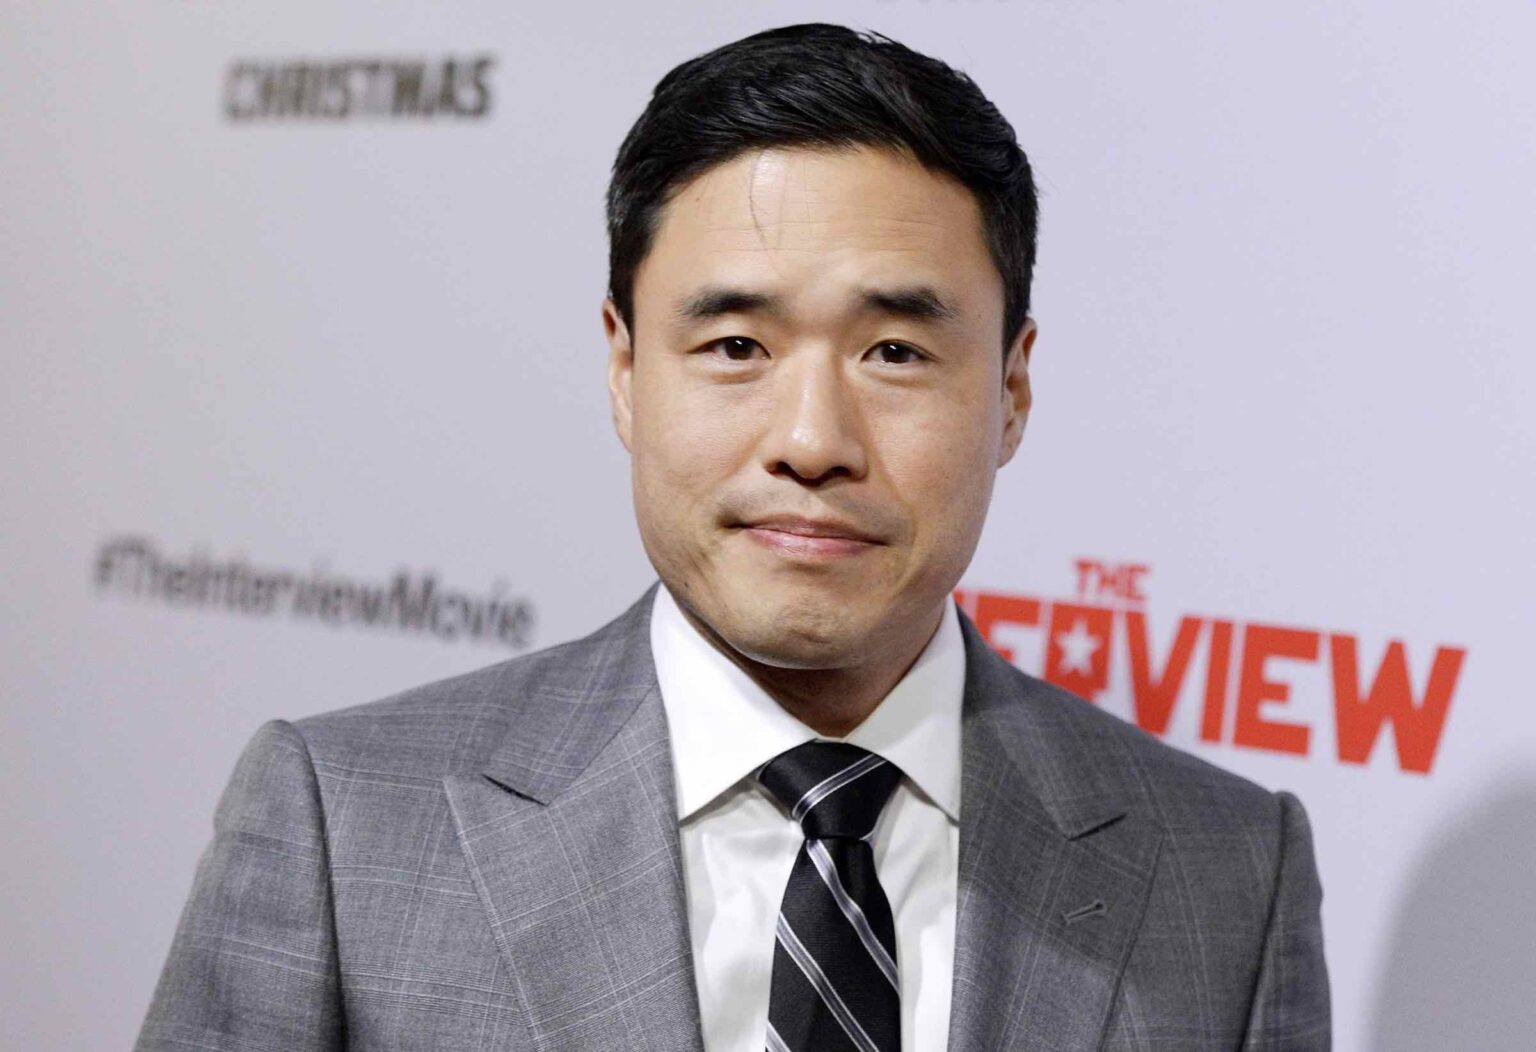 Head over heels for Randall Park after streaming 'WandaVision'? Check out all of the other great movies and TV shows Randall Park starred in here.